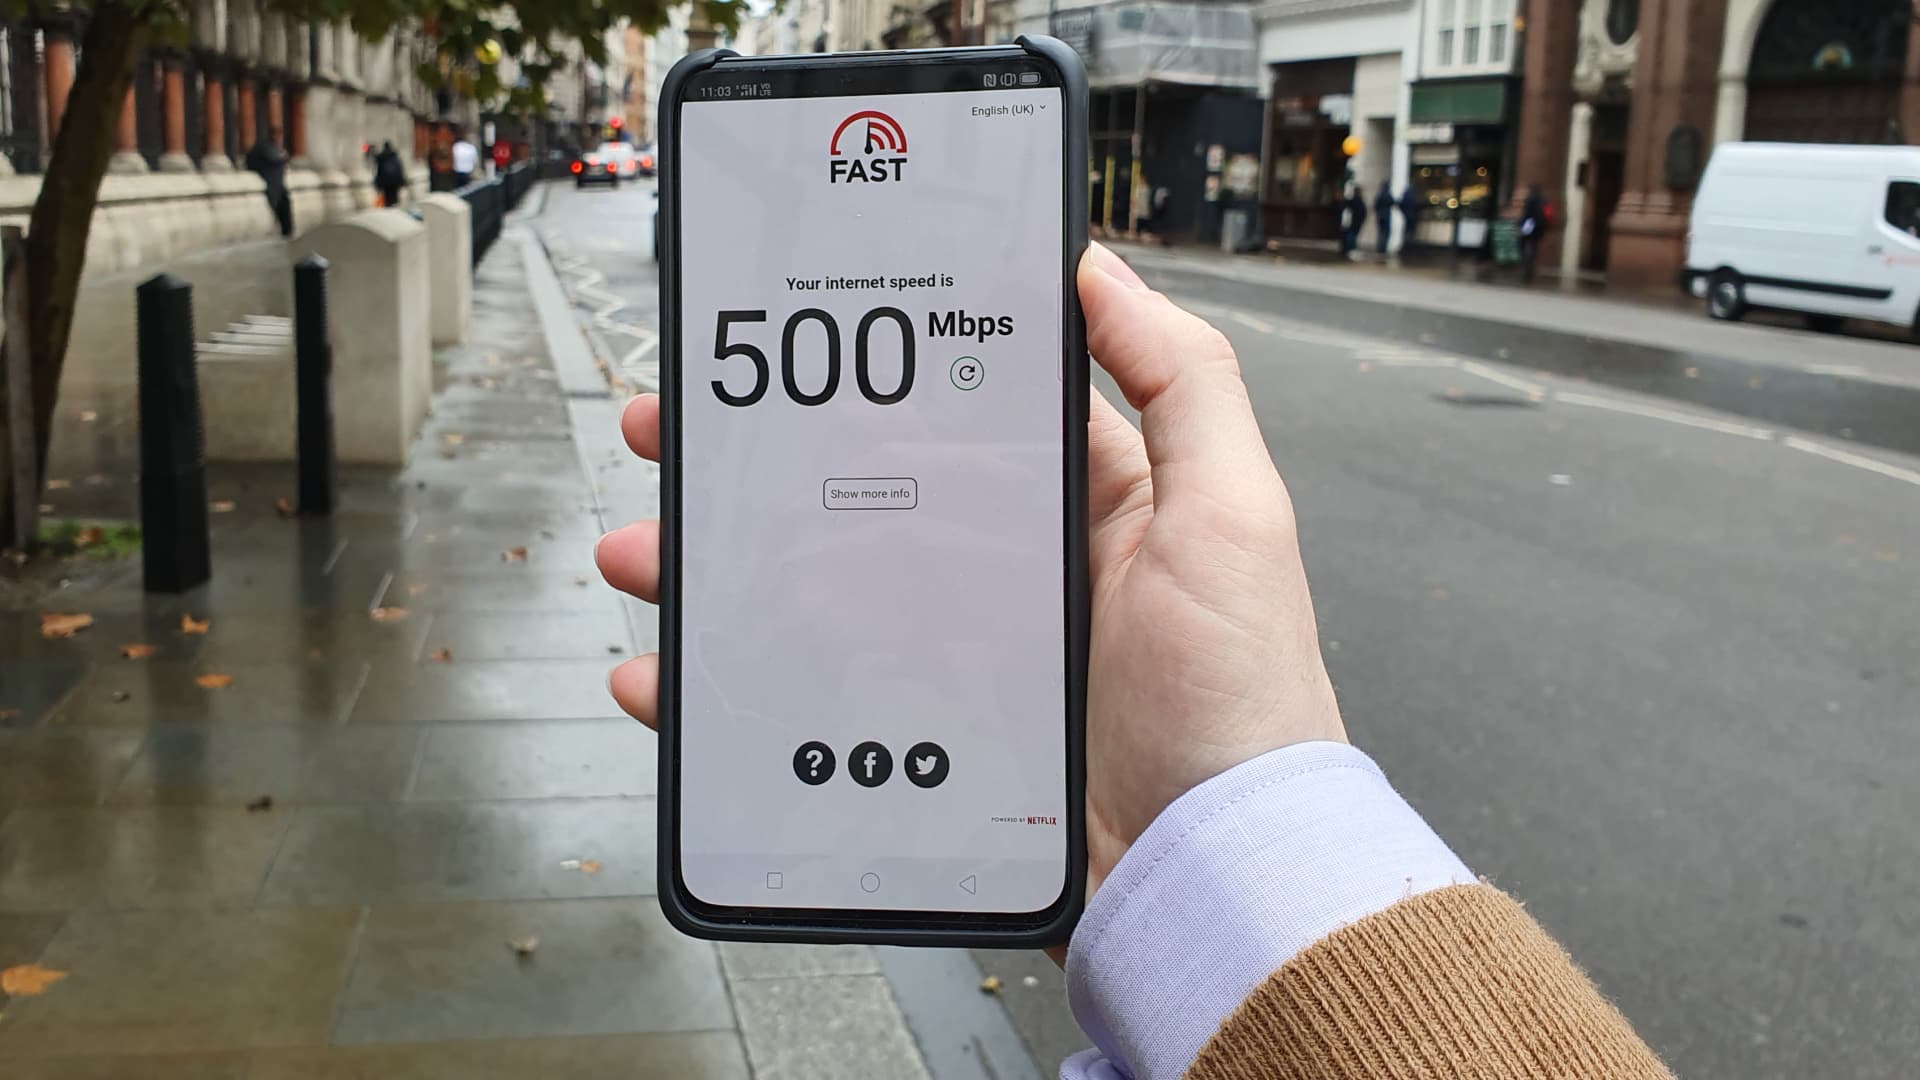 London lags behind rest of Europe when it comes to 5G network high quality, report finds